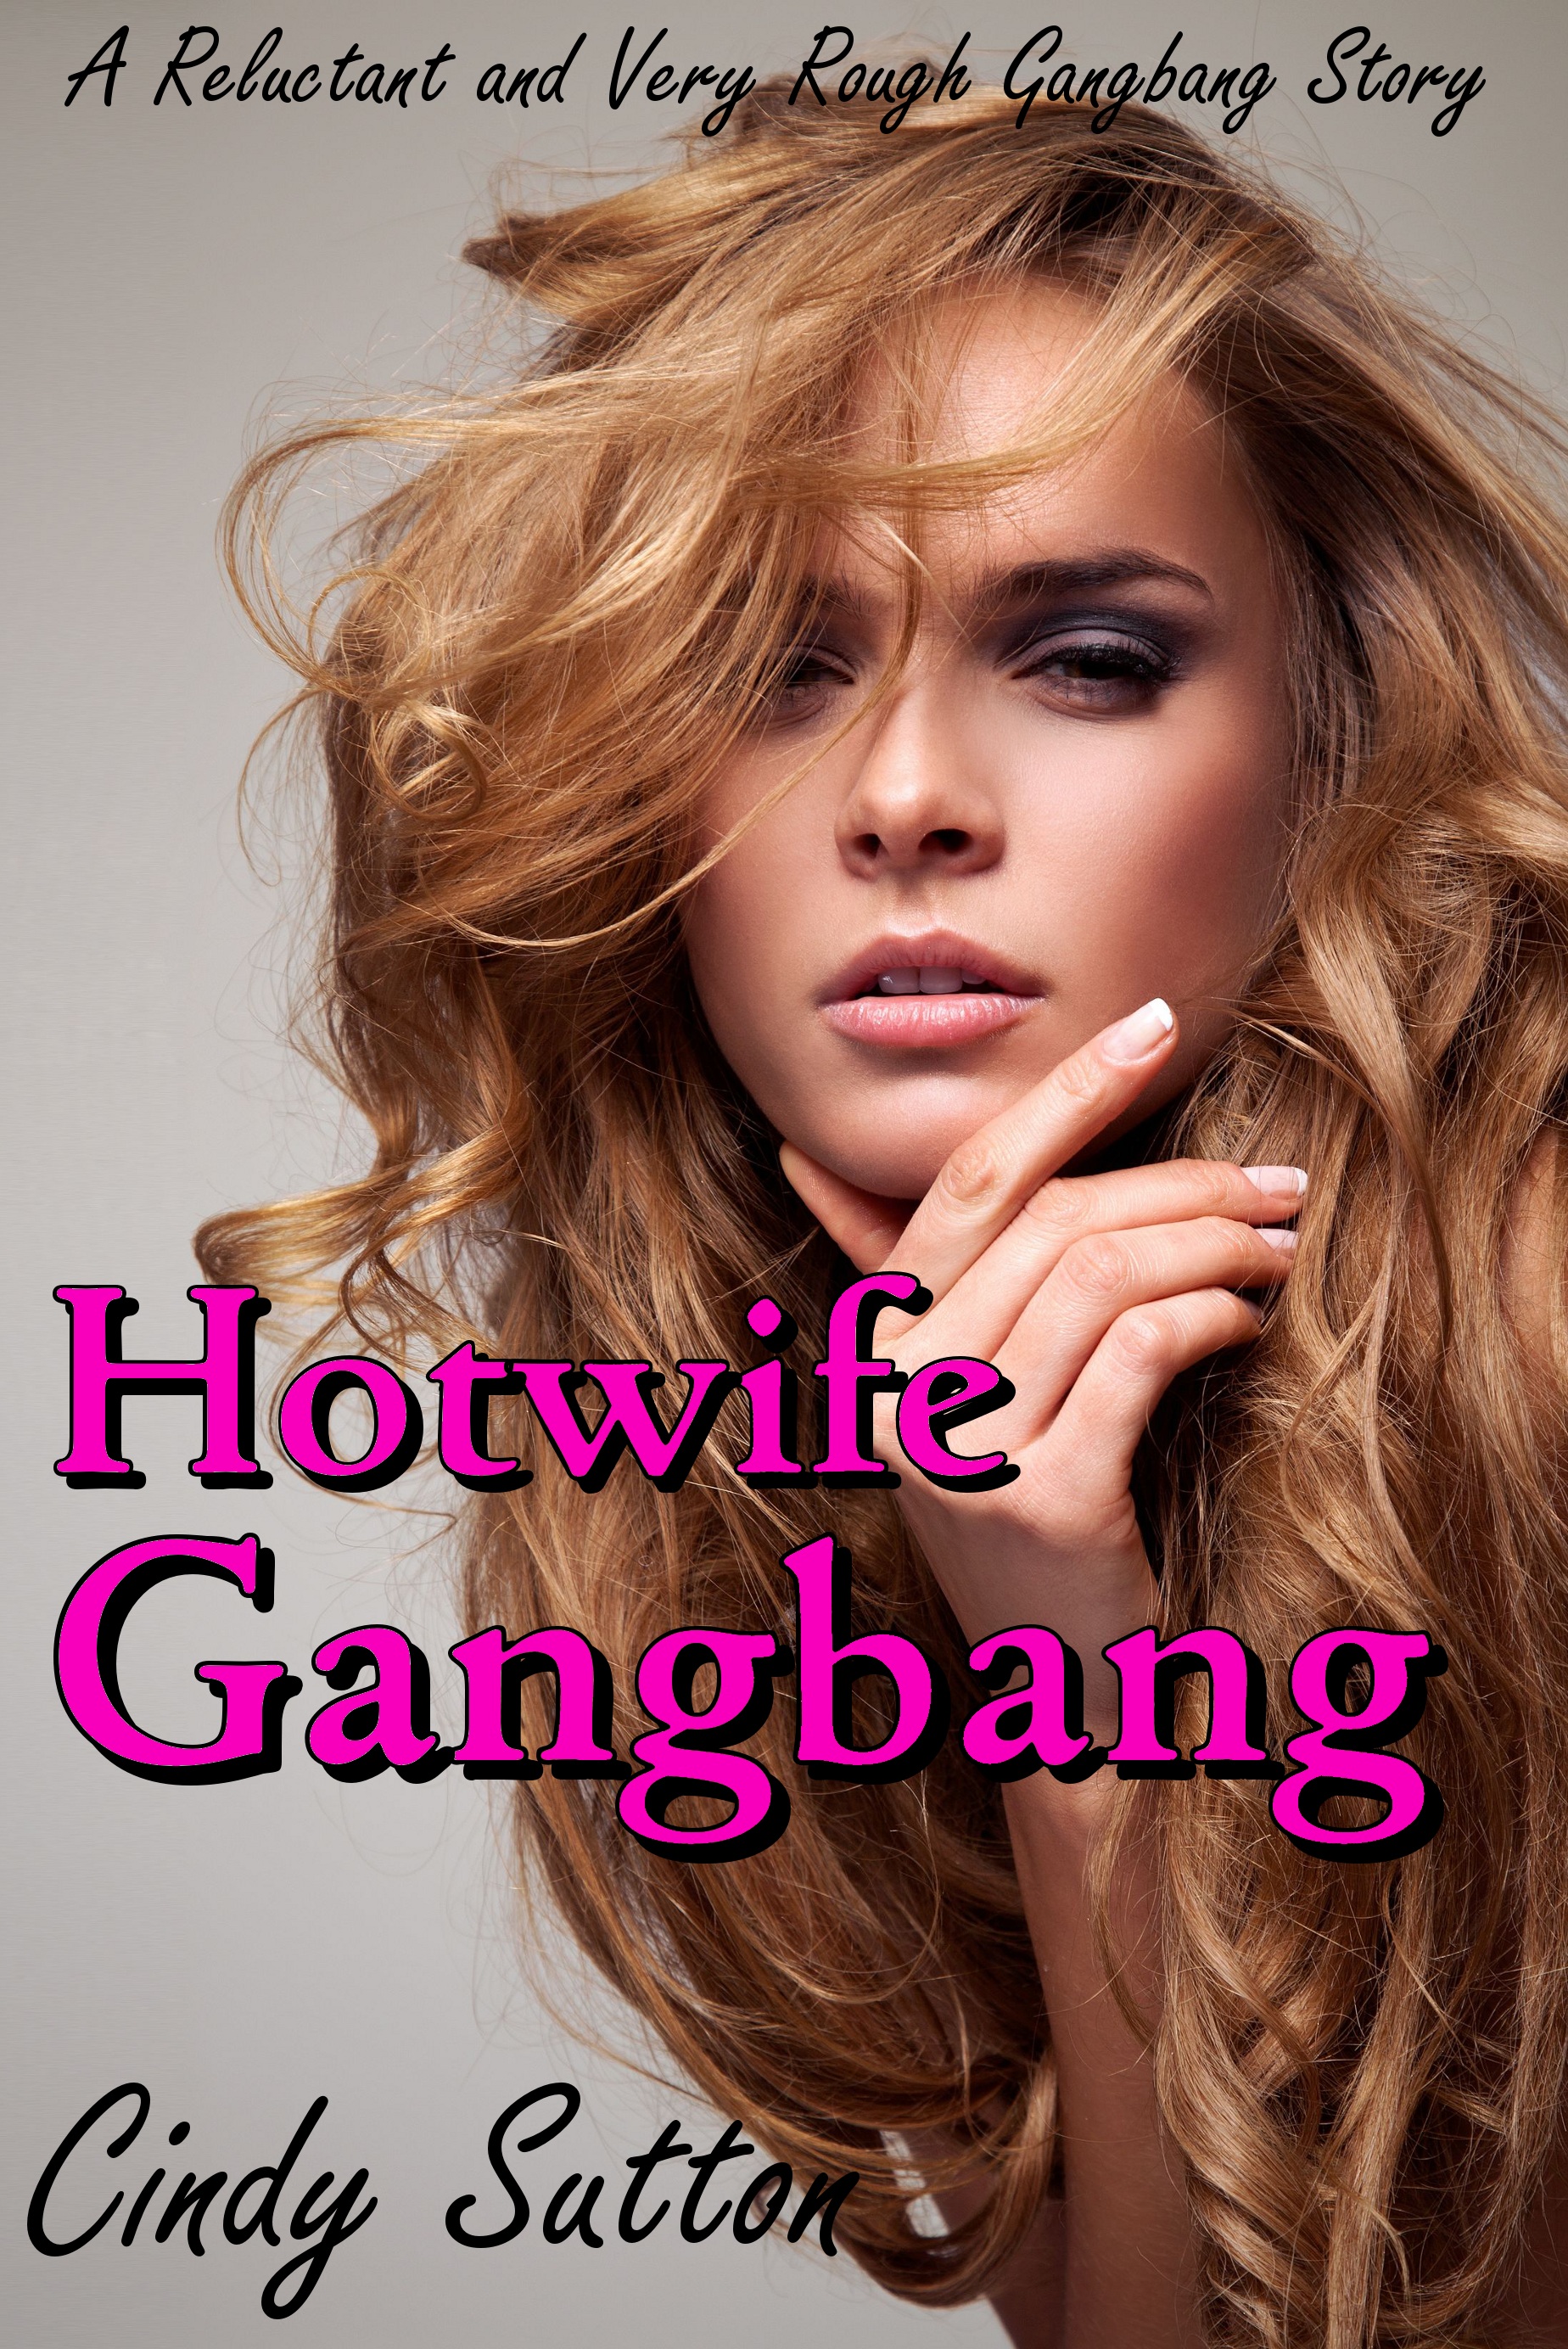 Hotwife Gangbang (A Reluctant and Very Rough Gangbang Story) by <b>Cindy Sutton</b> - ada7578e7f159800bd364ae11547dcc1755fbf88